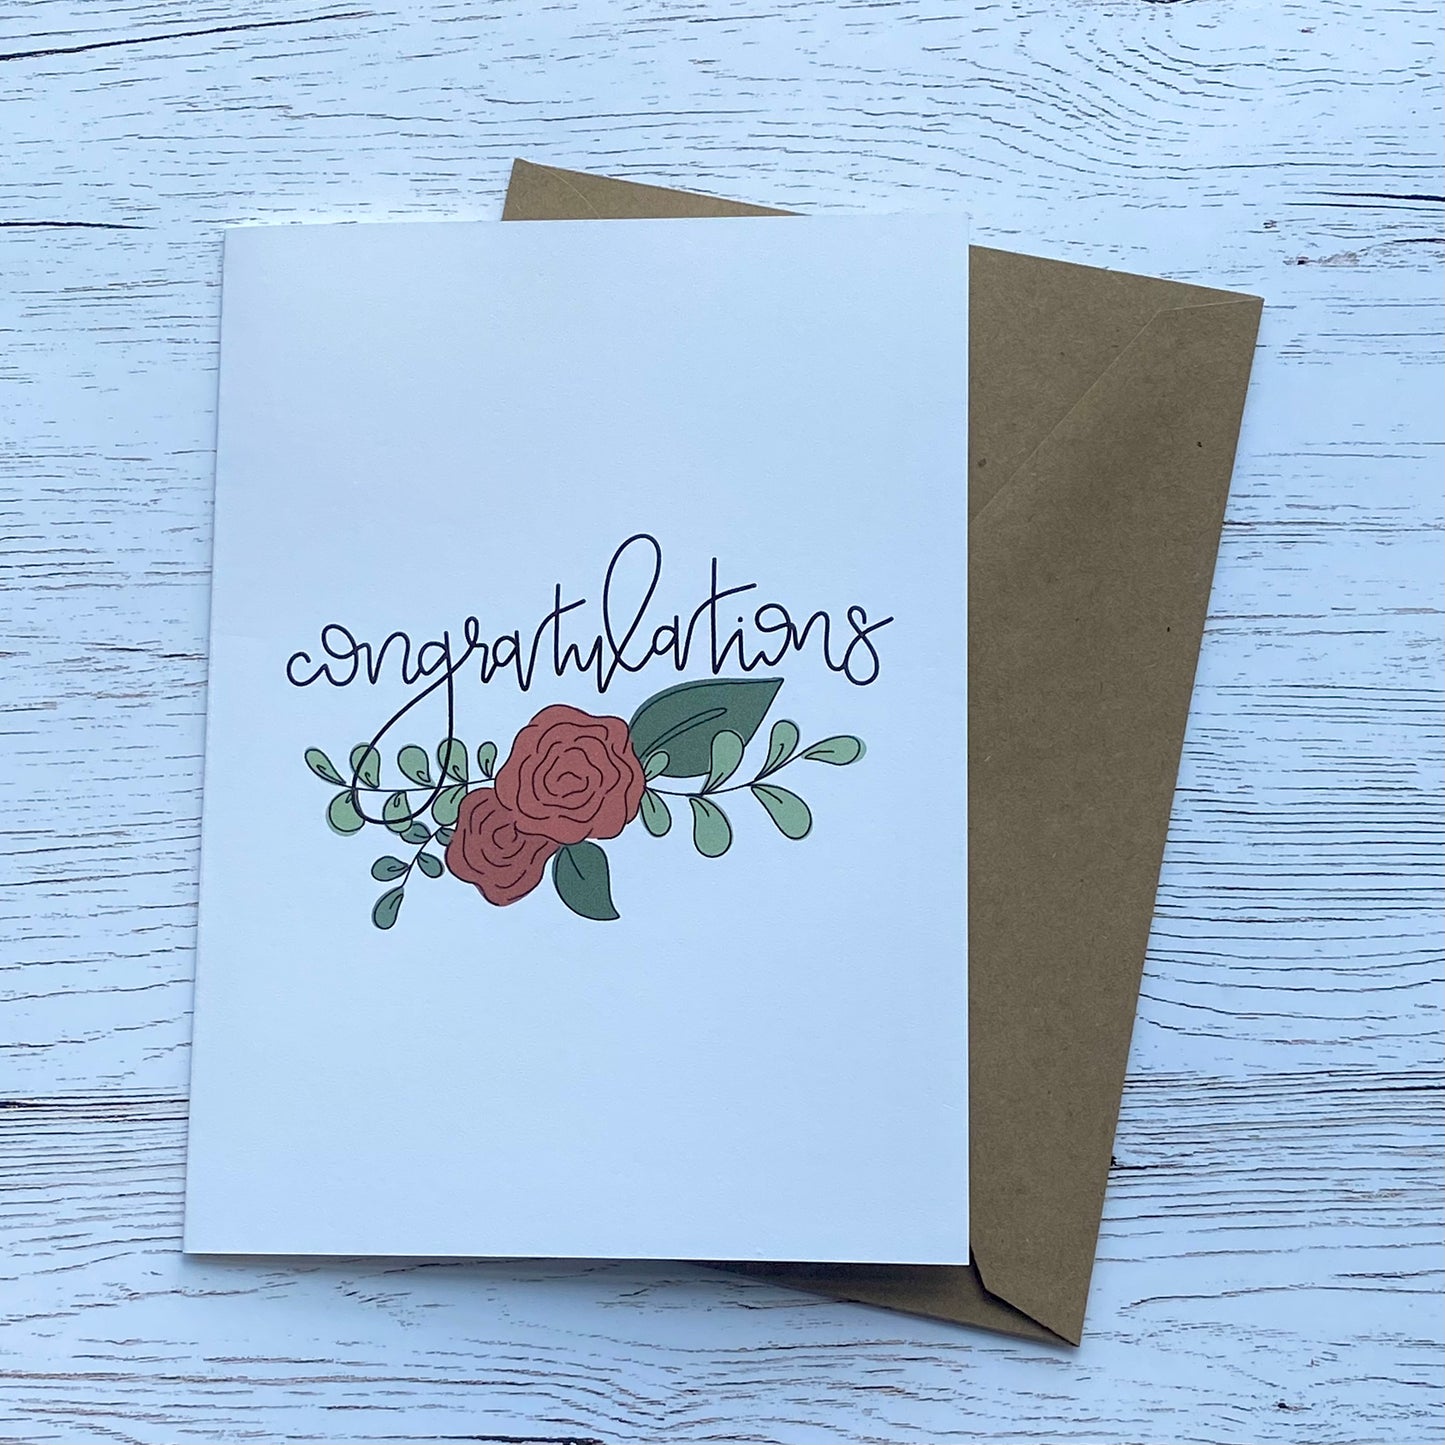 Congratulations Greeting Card with Roses